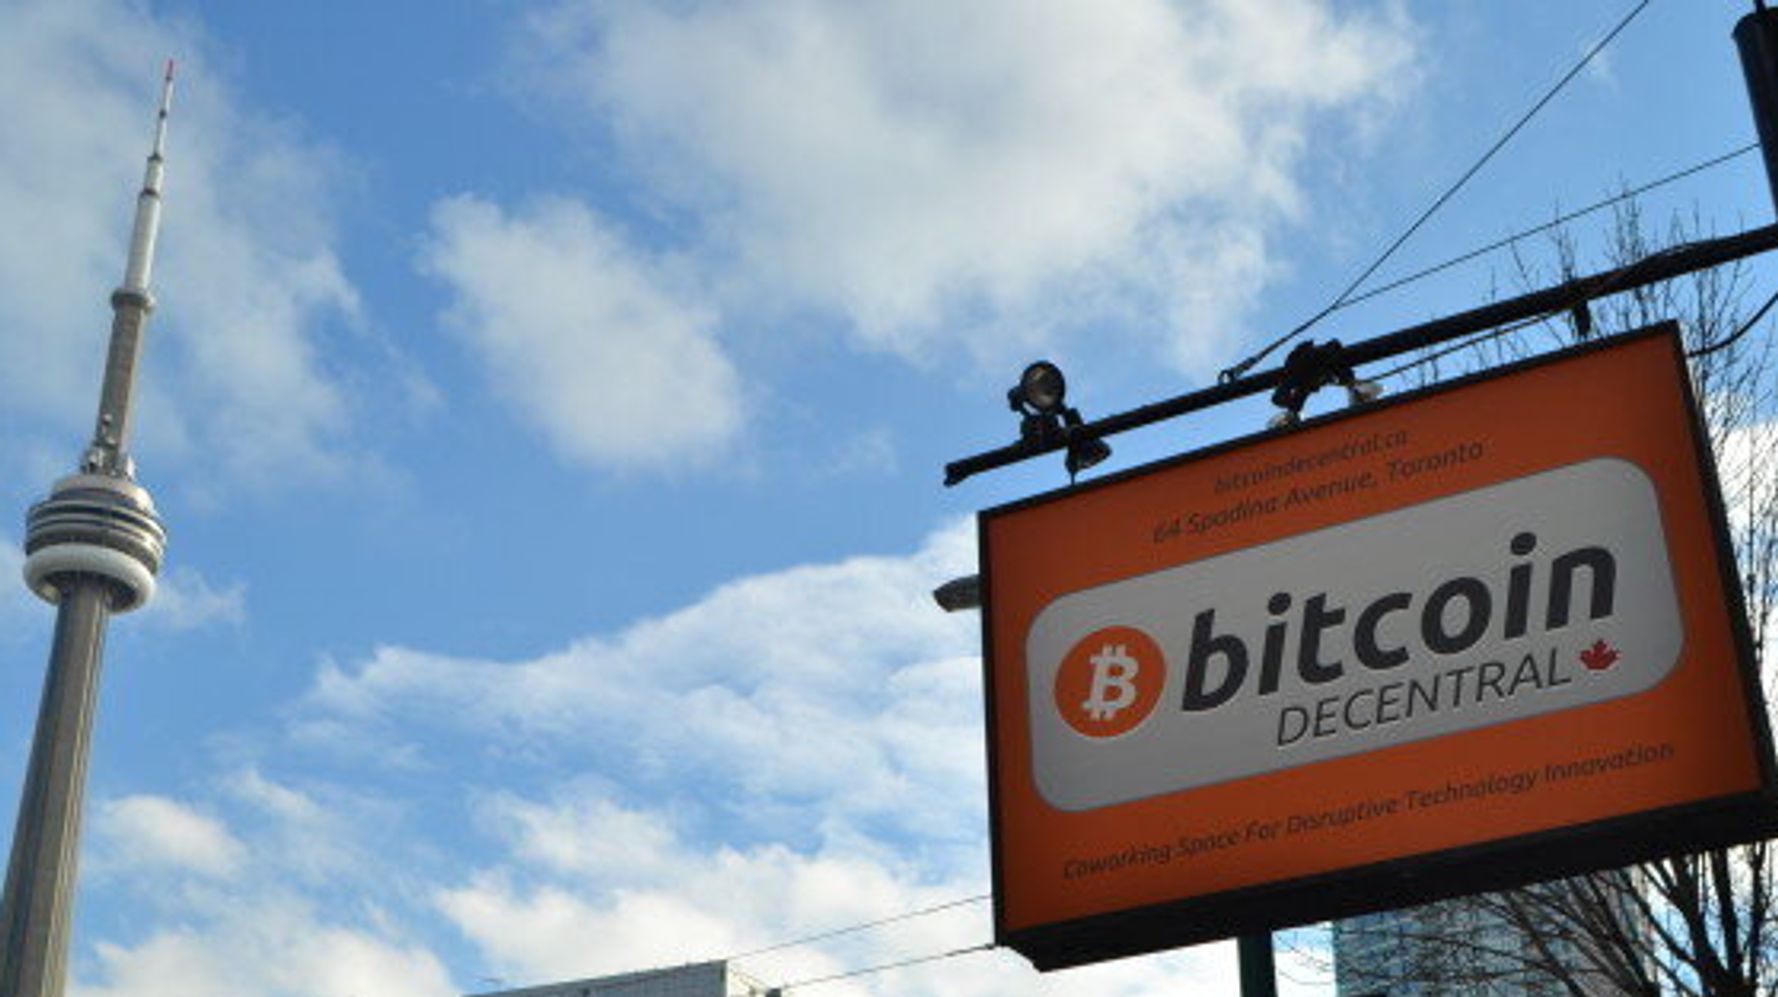 Bitcoin ATM Lands In Toronto As Digital Currency Goes Mainstream | HuffPost Canada Business